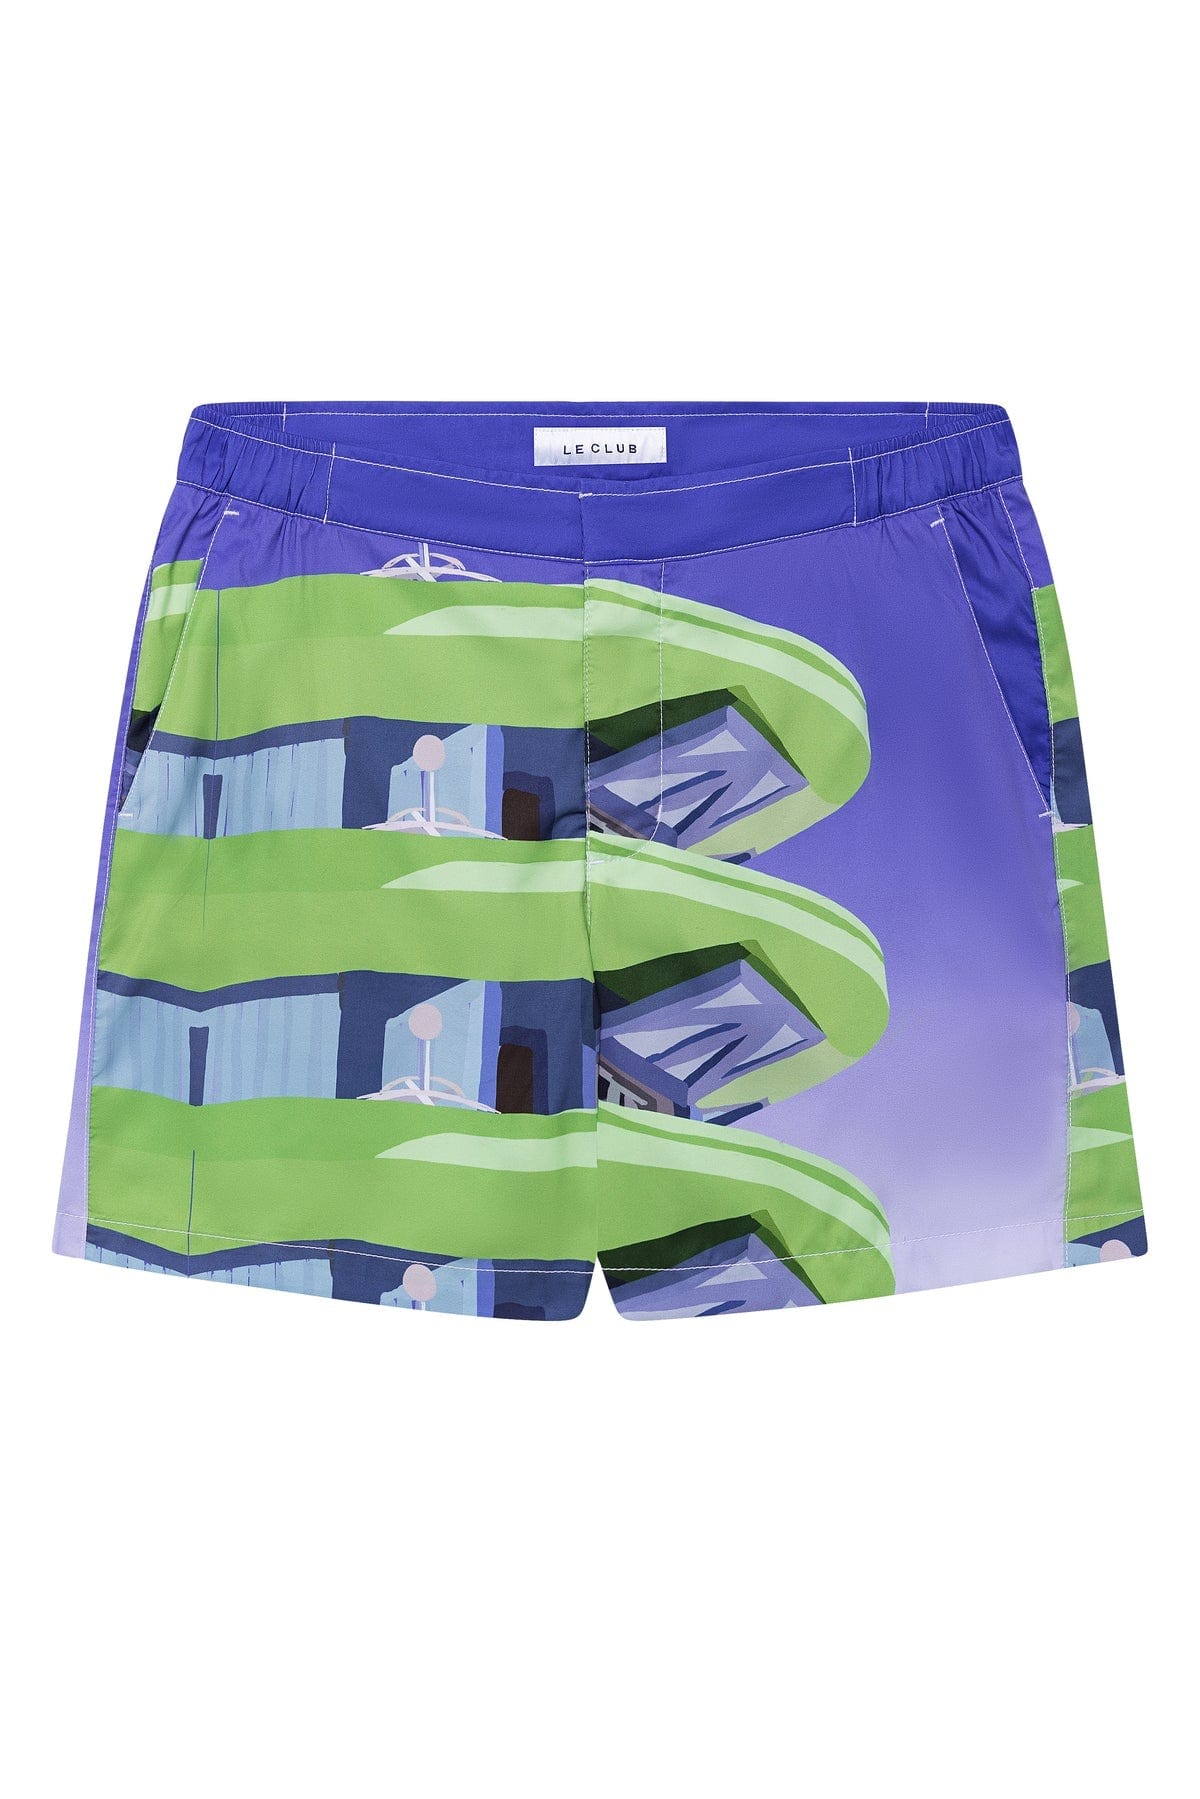 Louis Vuitton Brown Shorts Pool Party Summer Luxury Fashion Beach For Men, by SuperHyp Store, Jul, 2023